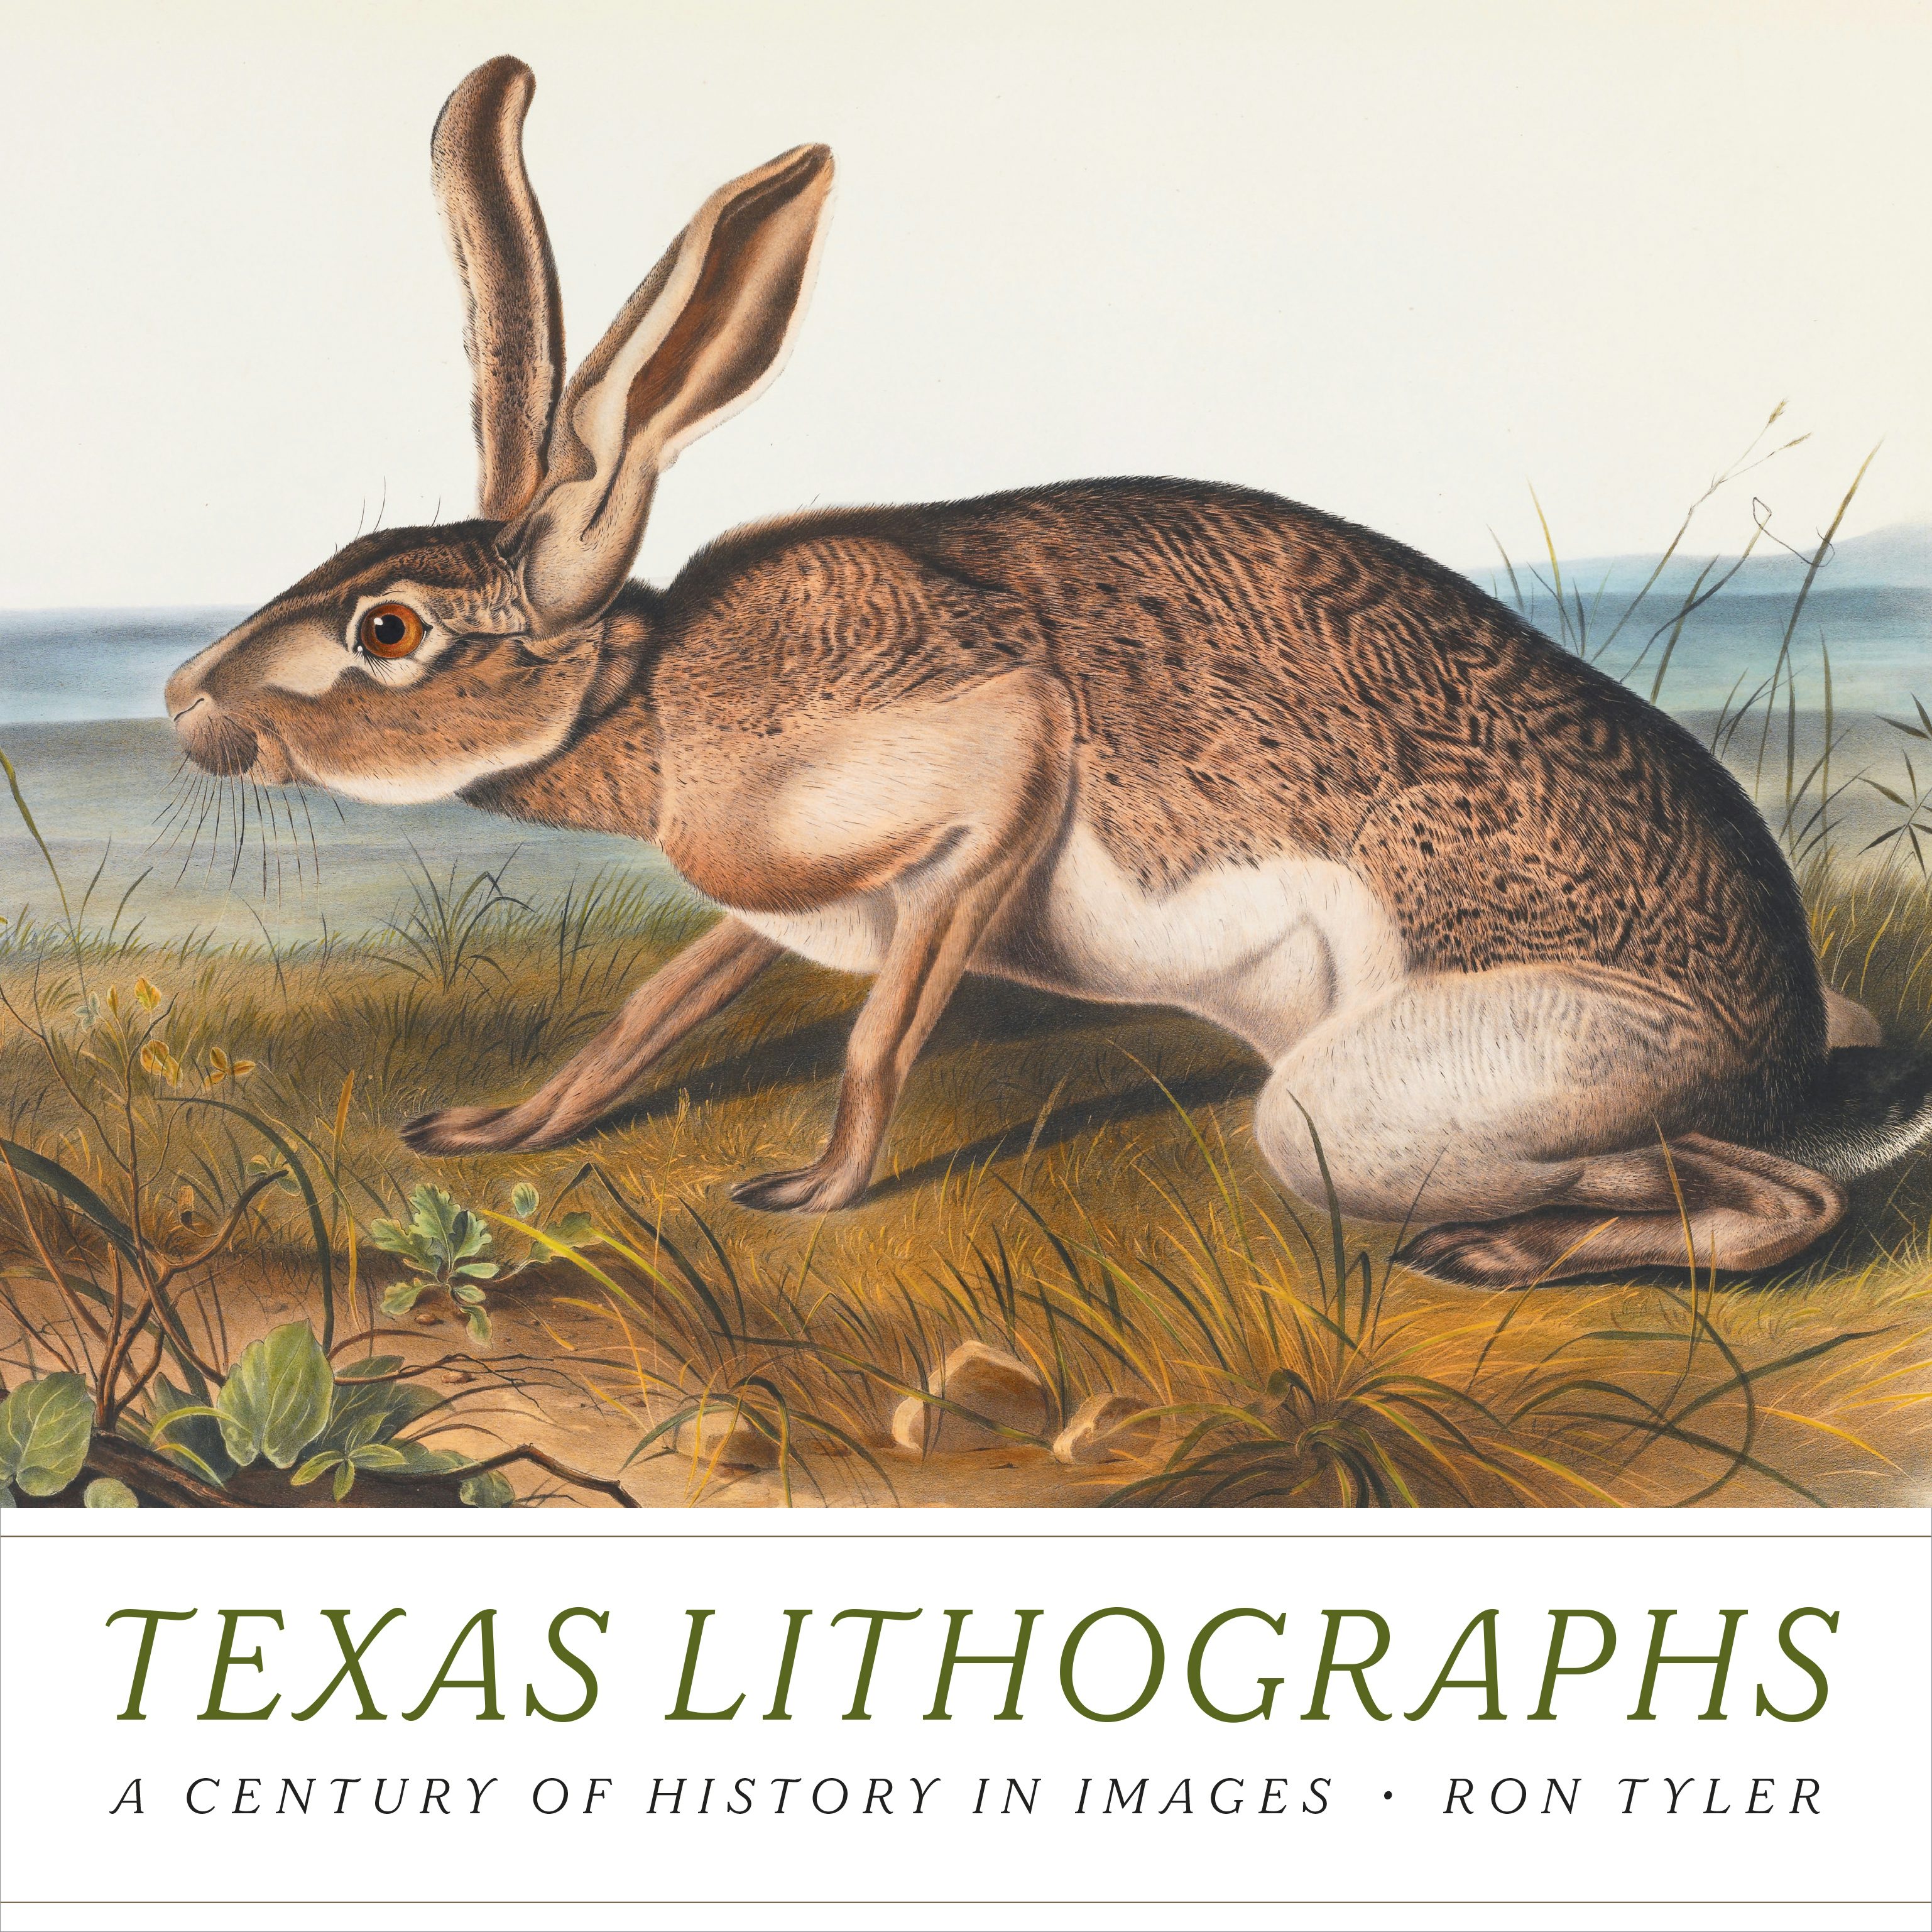 Texas Lithographs: A Century of History in Images